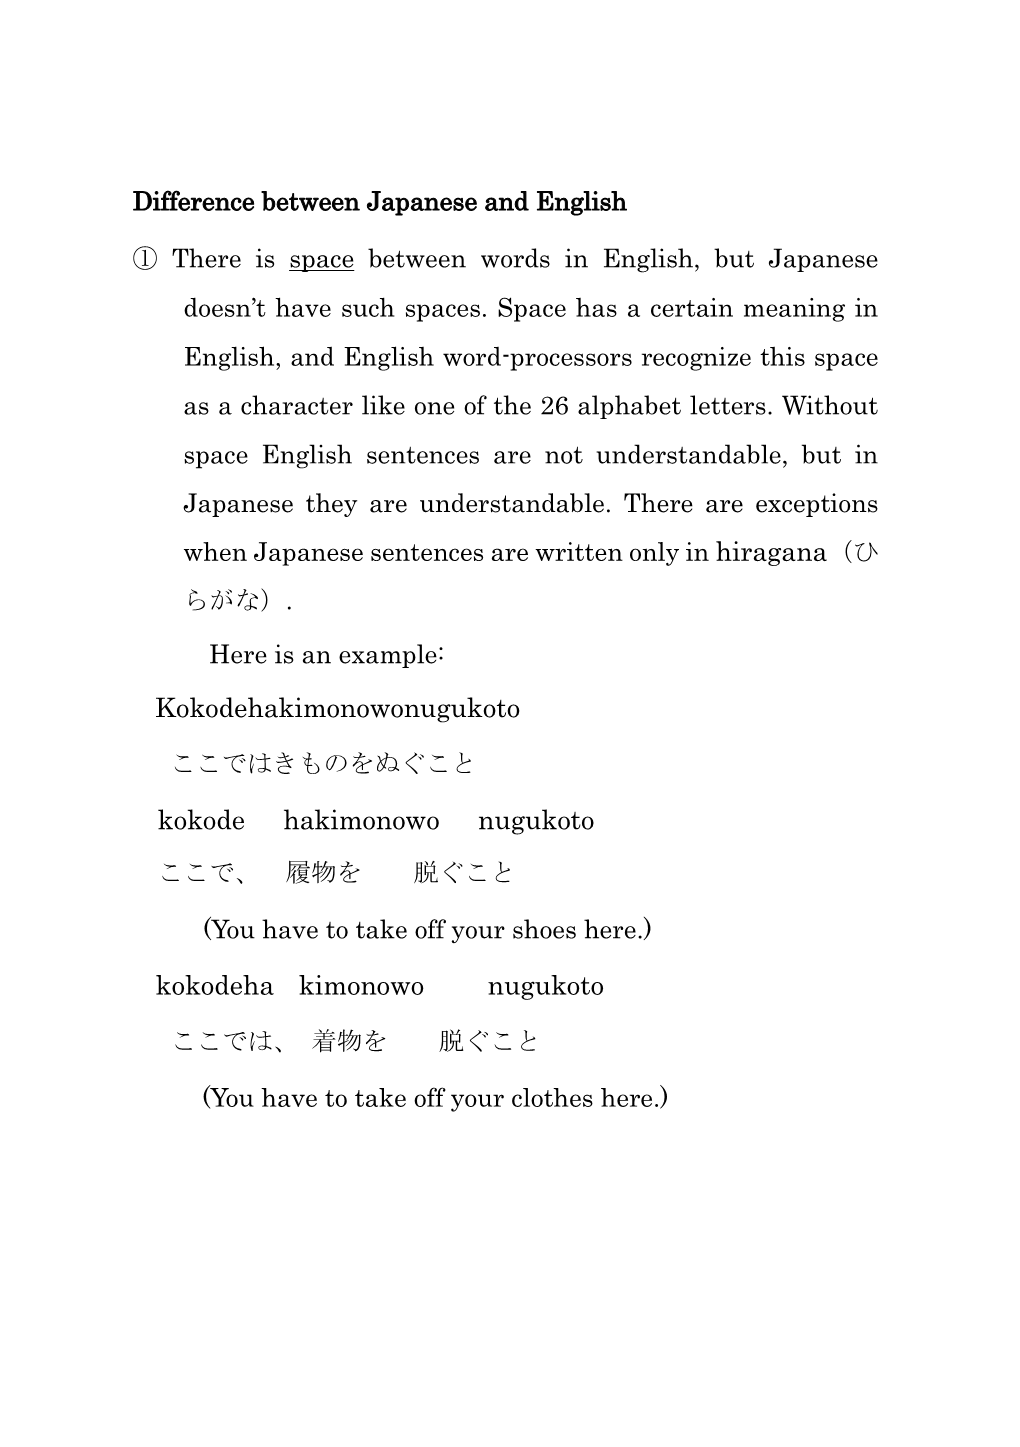 Difference Between Japanese and English.Pdf へのリンク